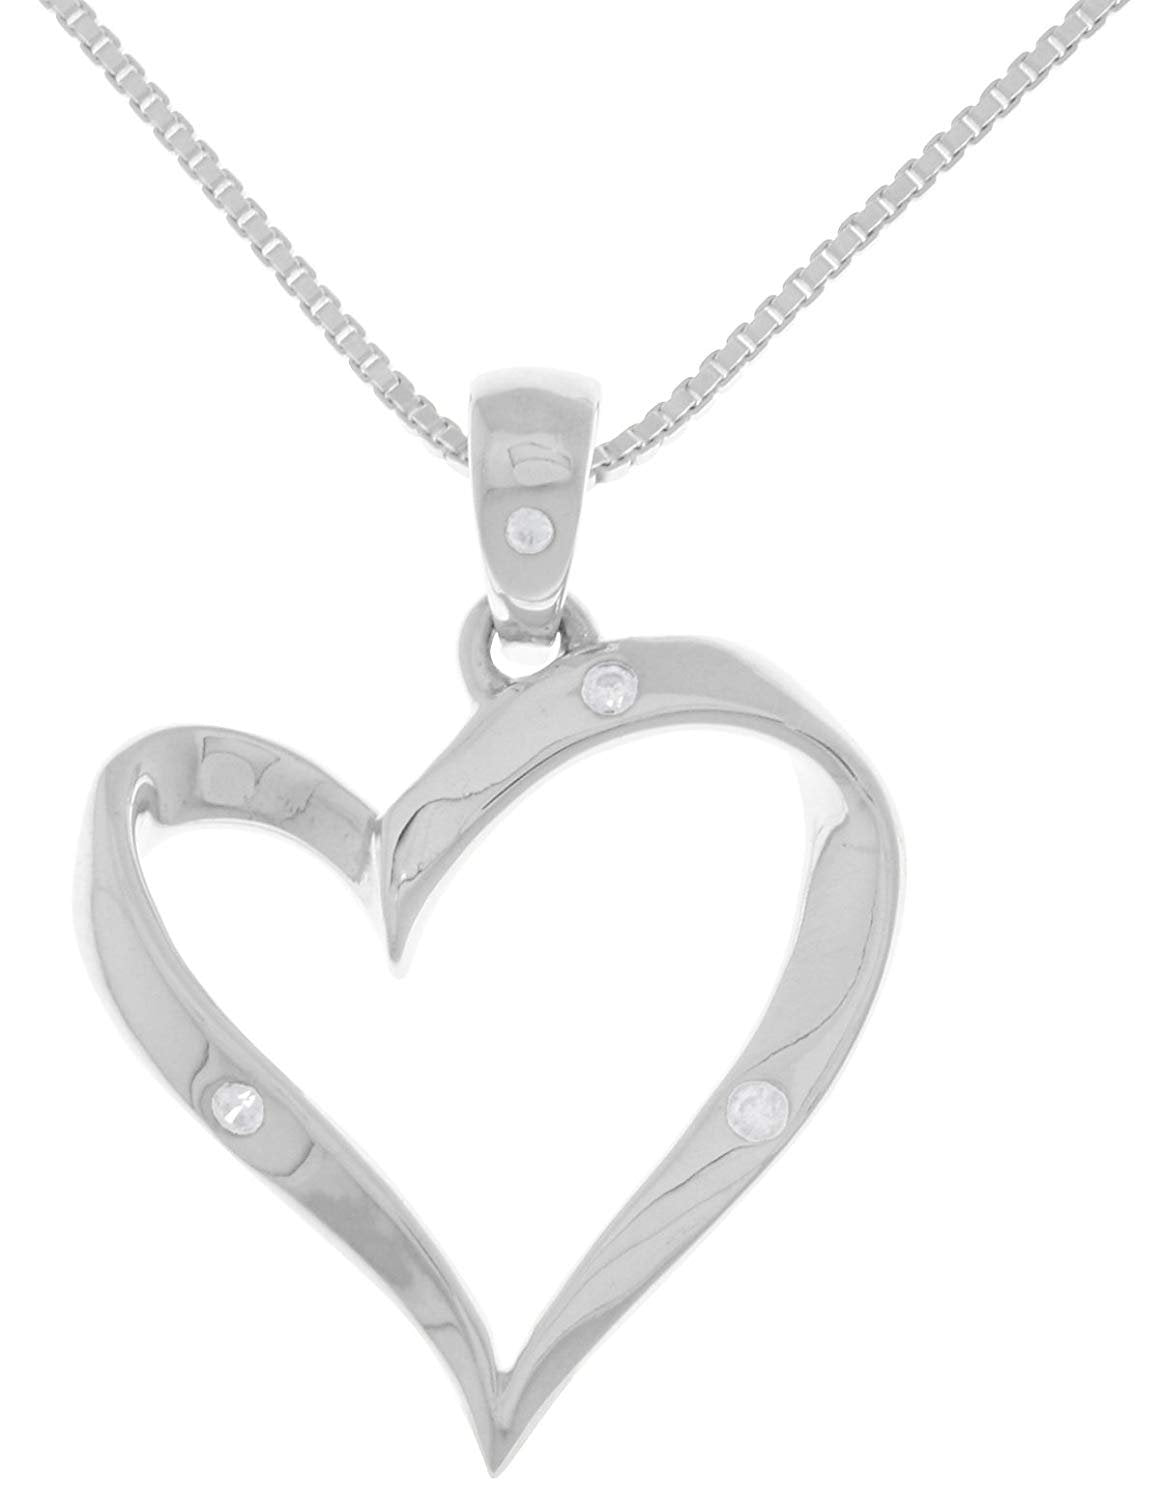 Jewelry Trends Sterling Silver Ribbon Heart Pendant with CZ on 18 Inch Box Chain Necklace